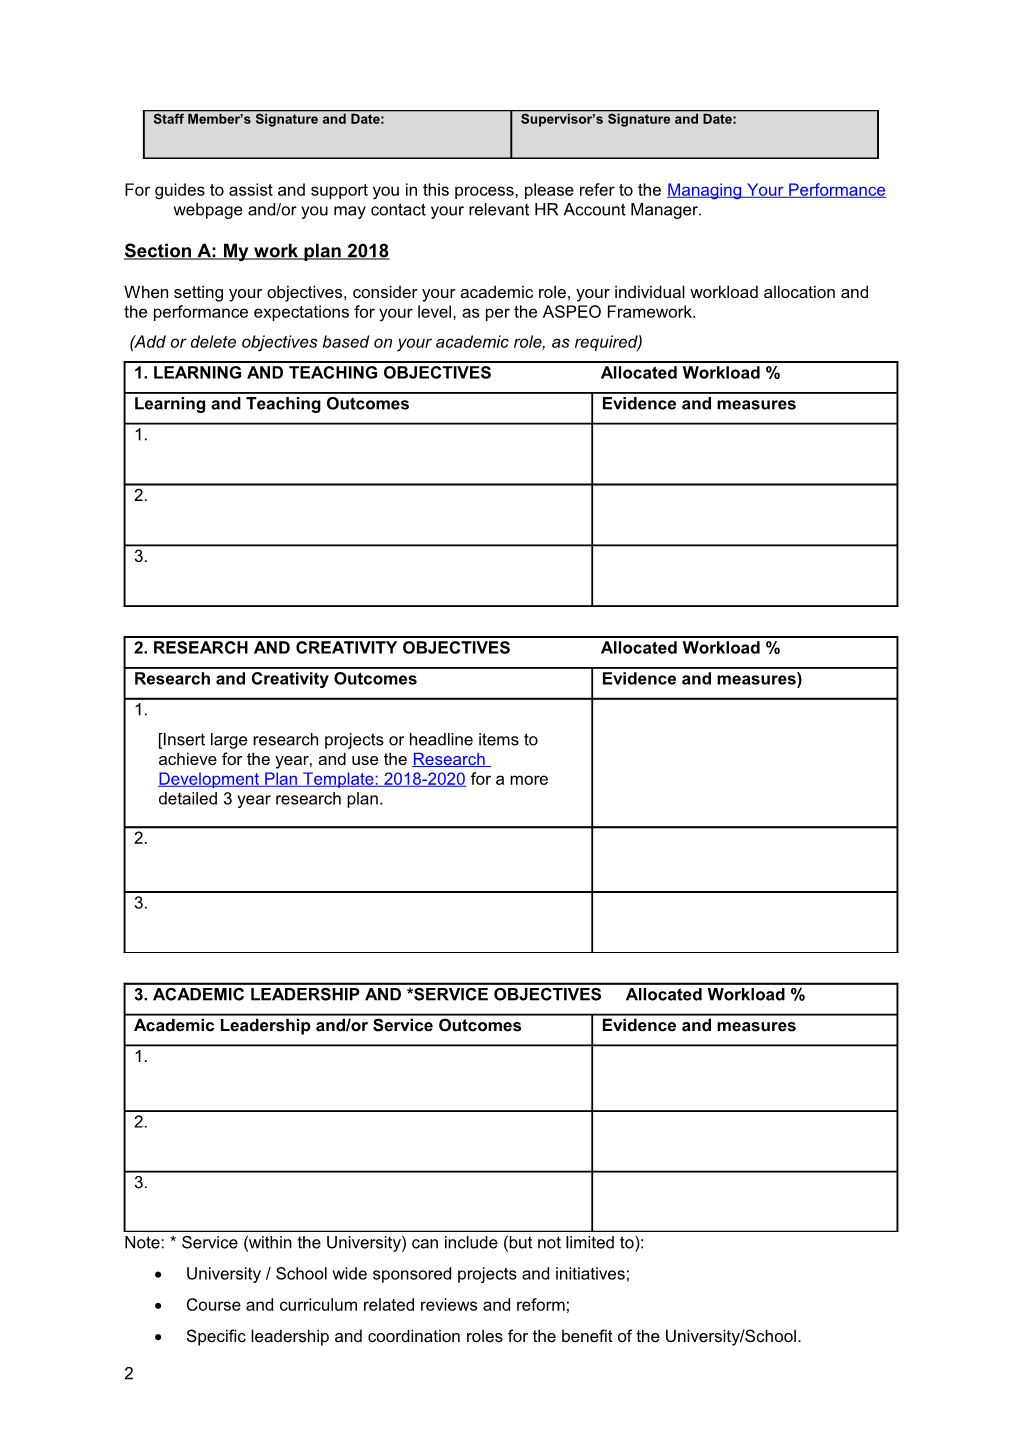 Stage 1 Plan (Sections A, B and C of This Form) to BE COMPLETED for YEAR COMMENCING 2018